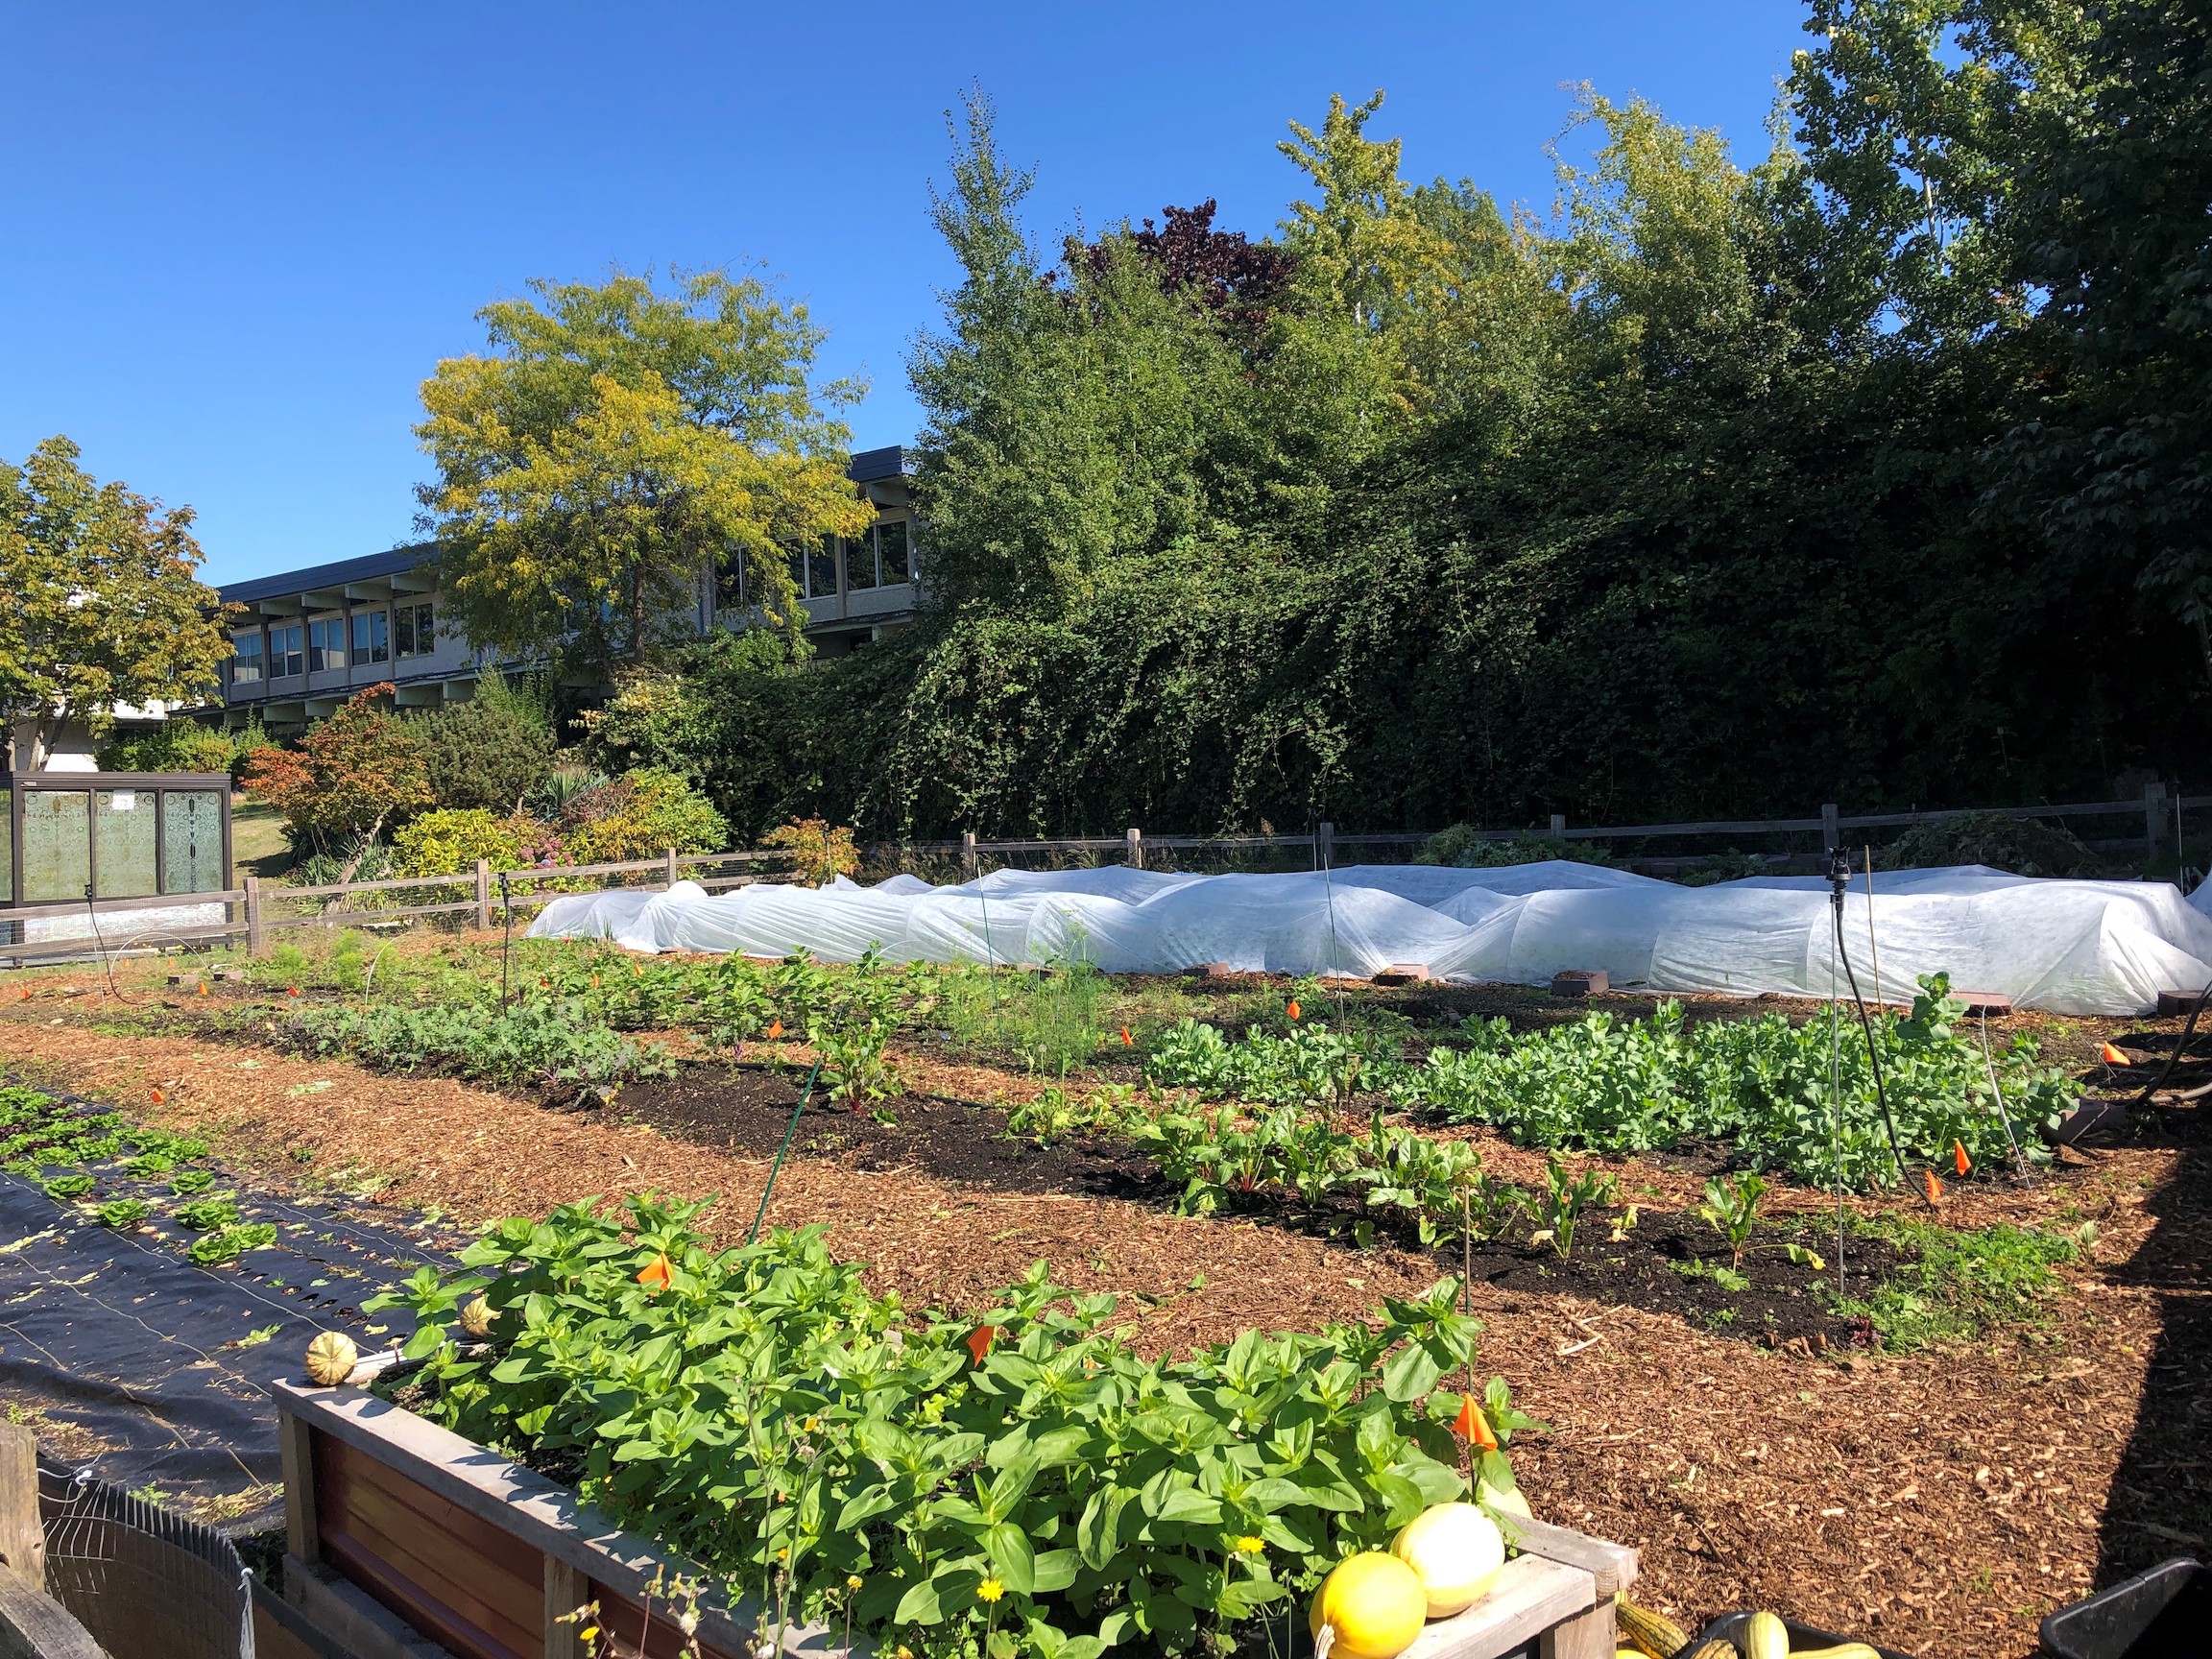 Image of community garden with rows of vegetables